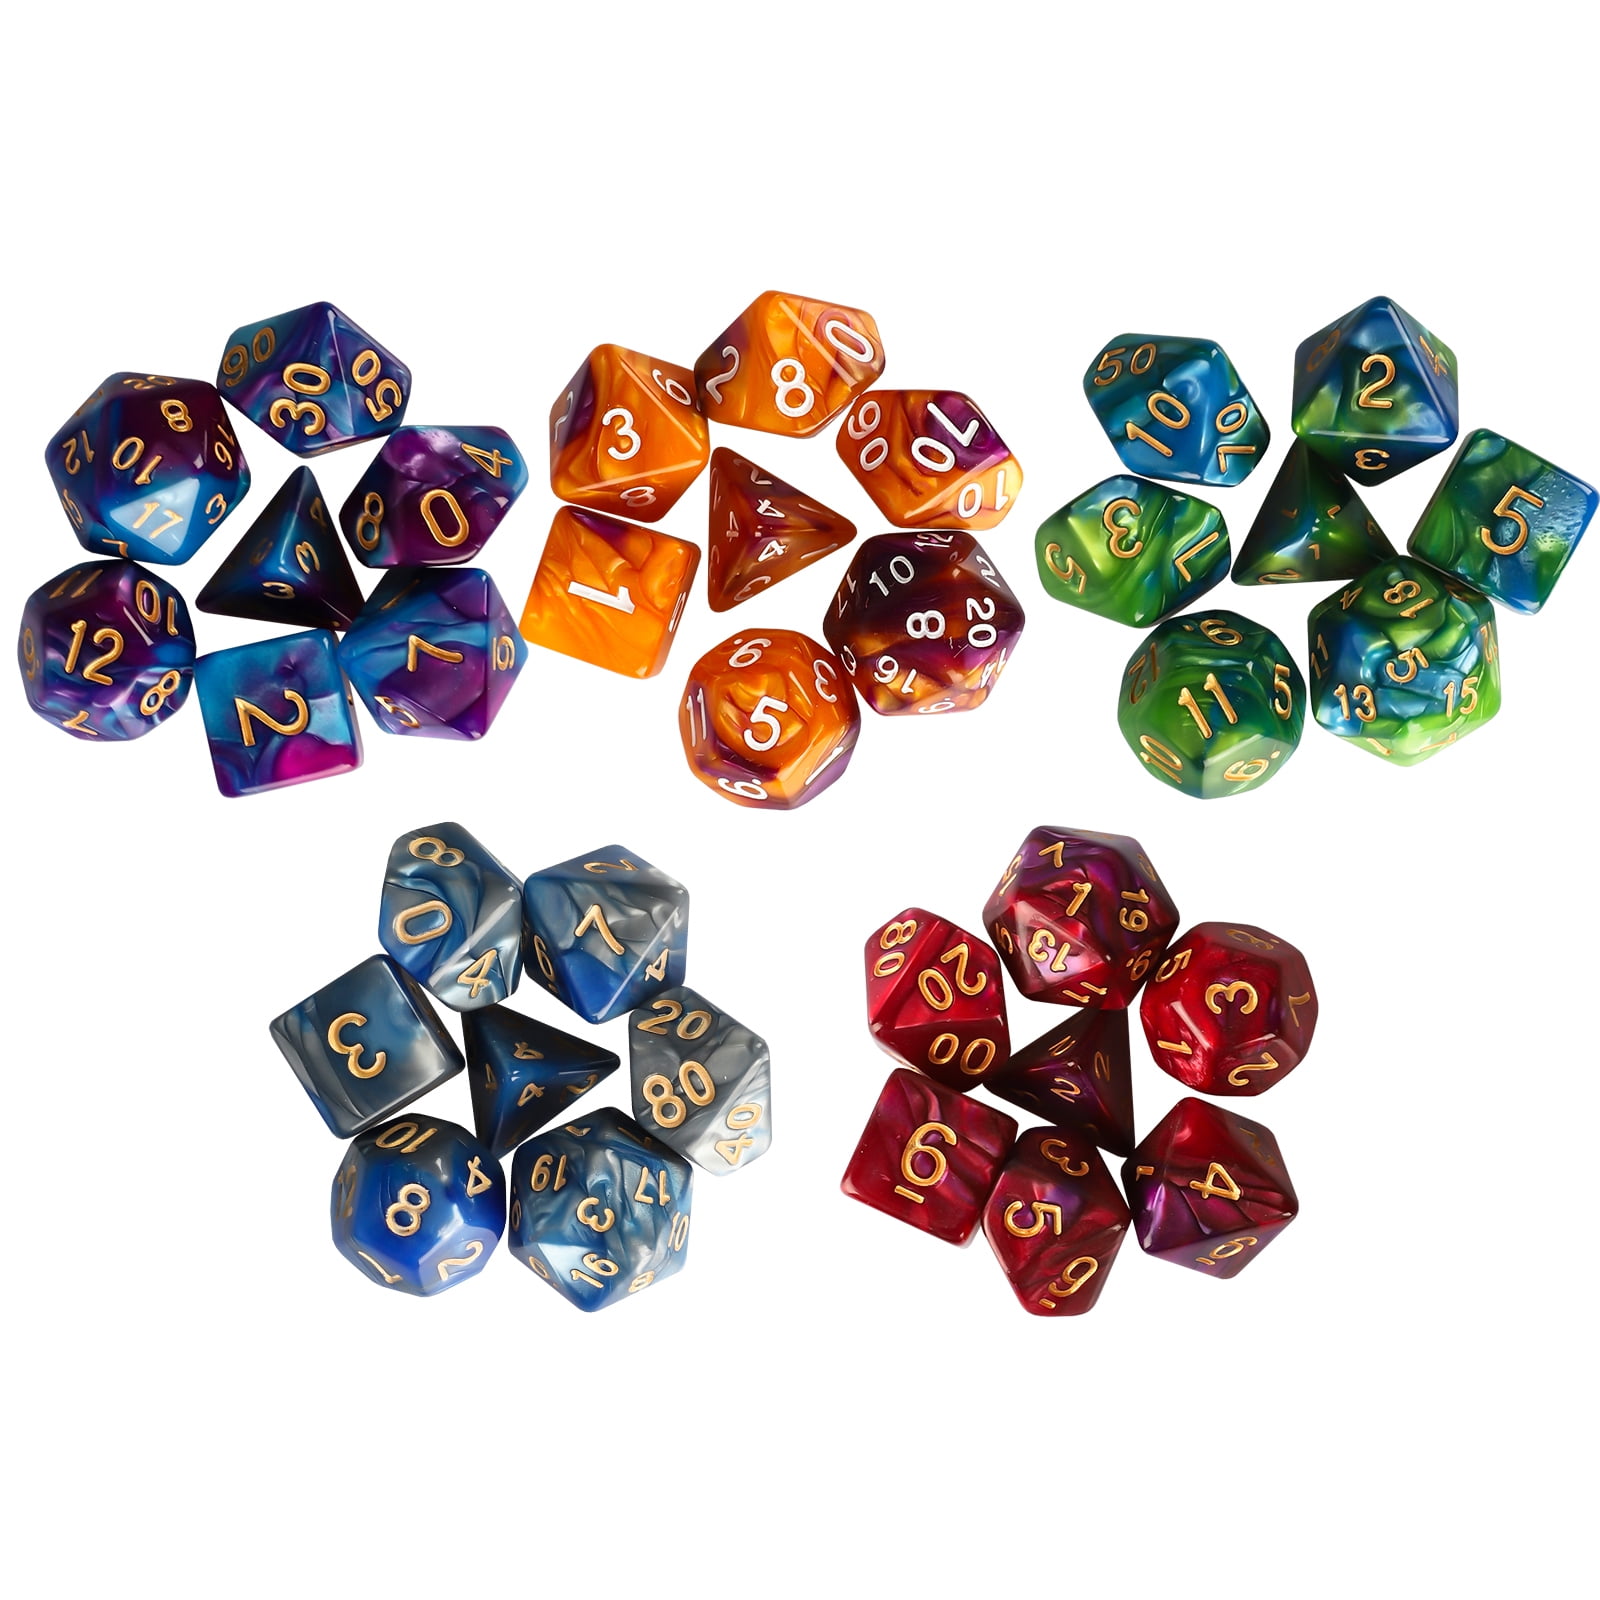 42Pcs/set Shiny Polyhedral Dice DND RPG MTG Role Playing Game Bag 6 Colors NEW 